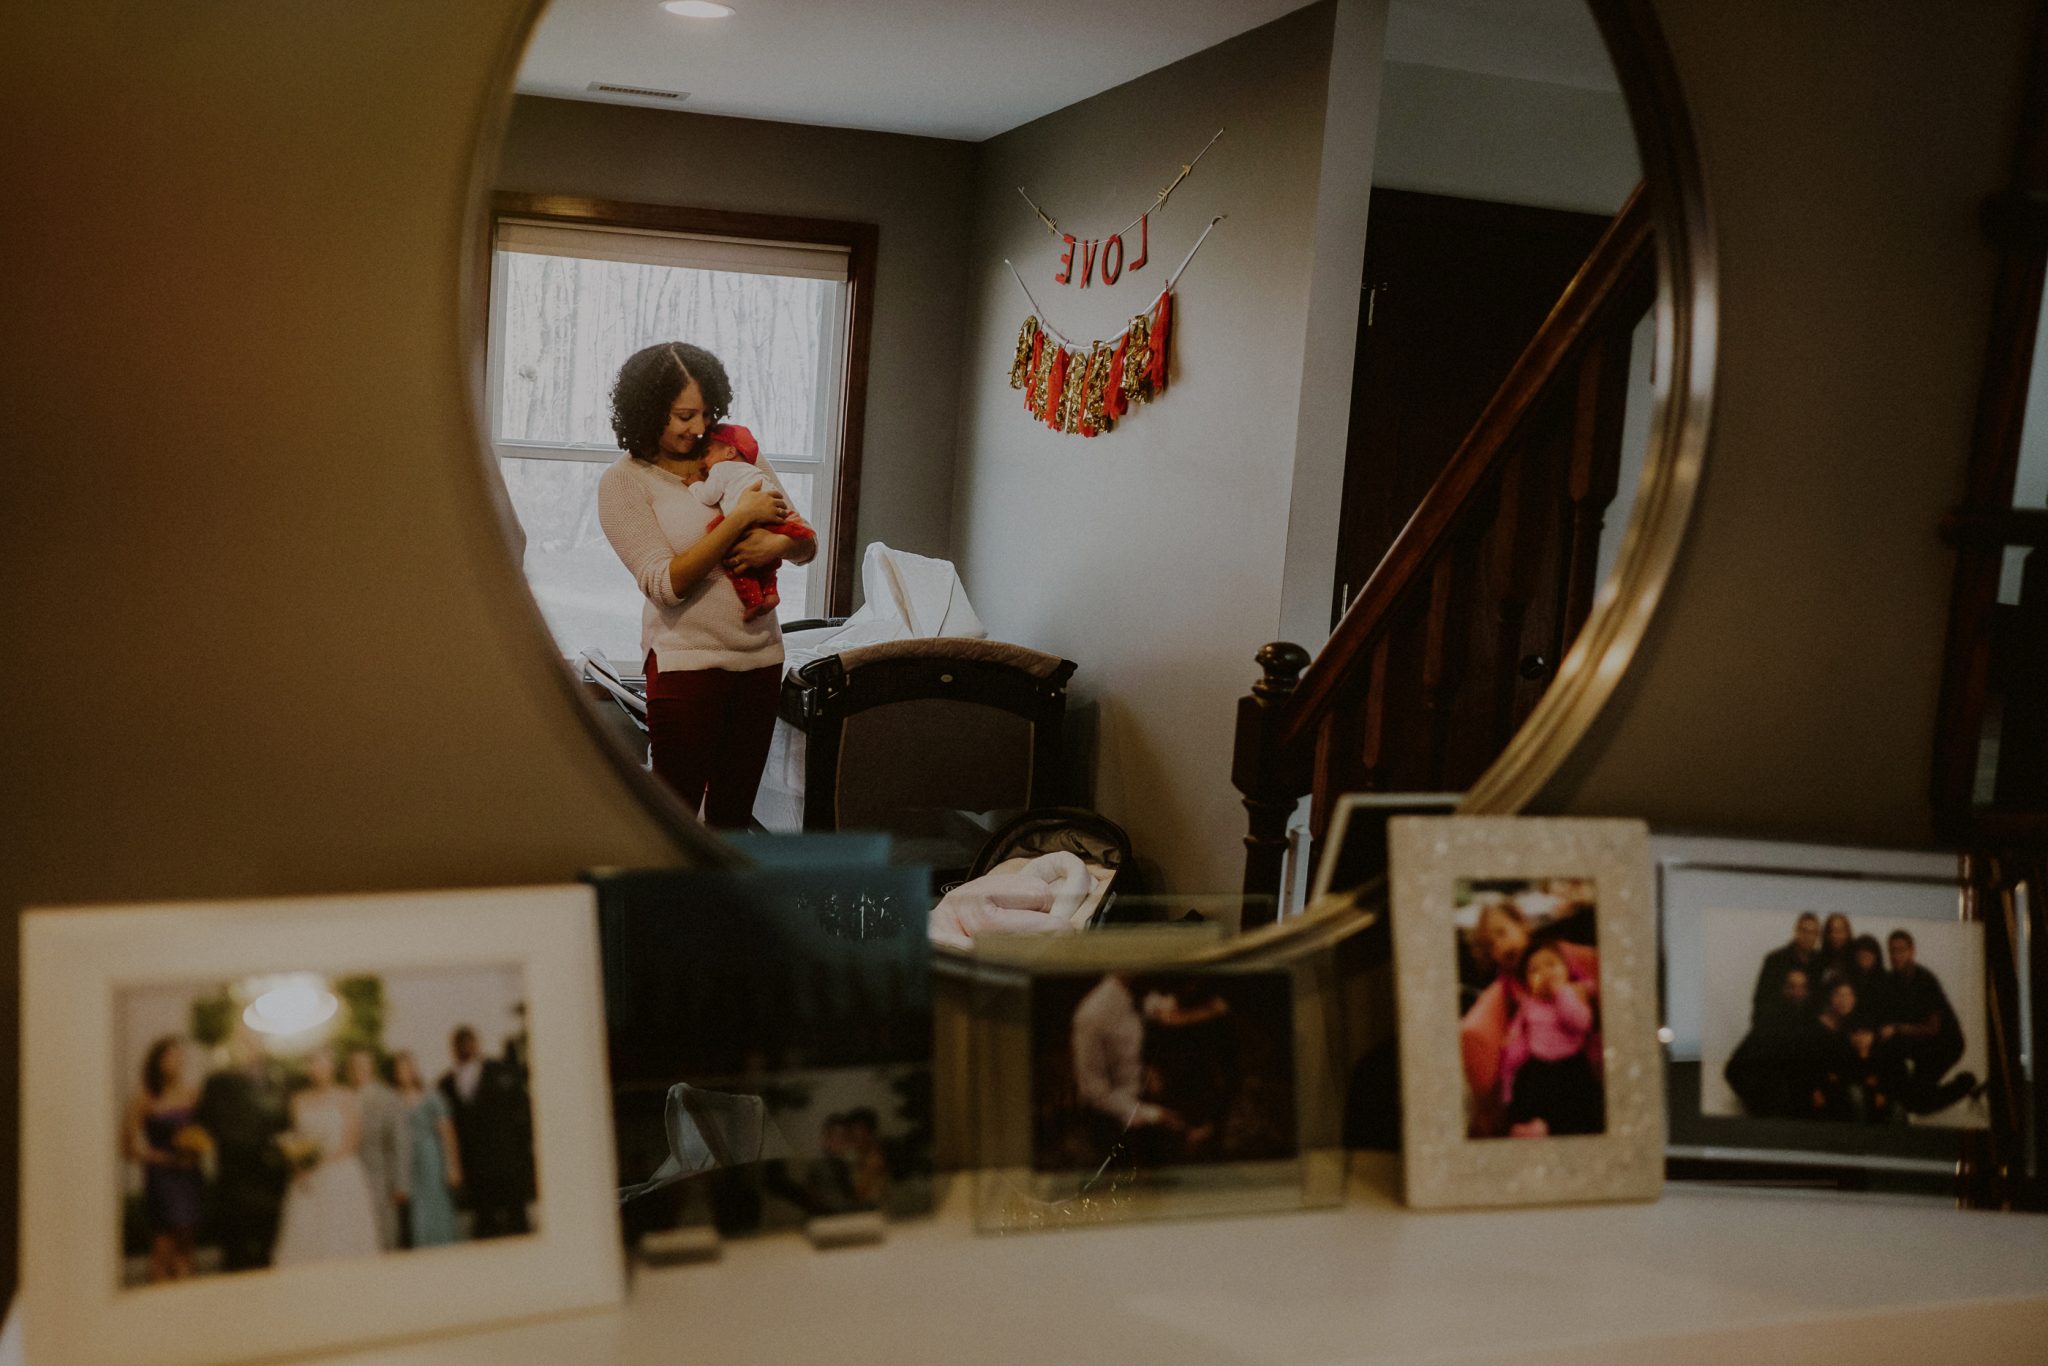 reflection of mother holding child in mirror, juxtaposed by printed family photos on counter